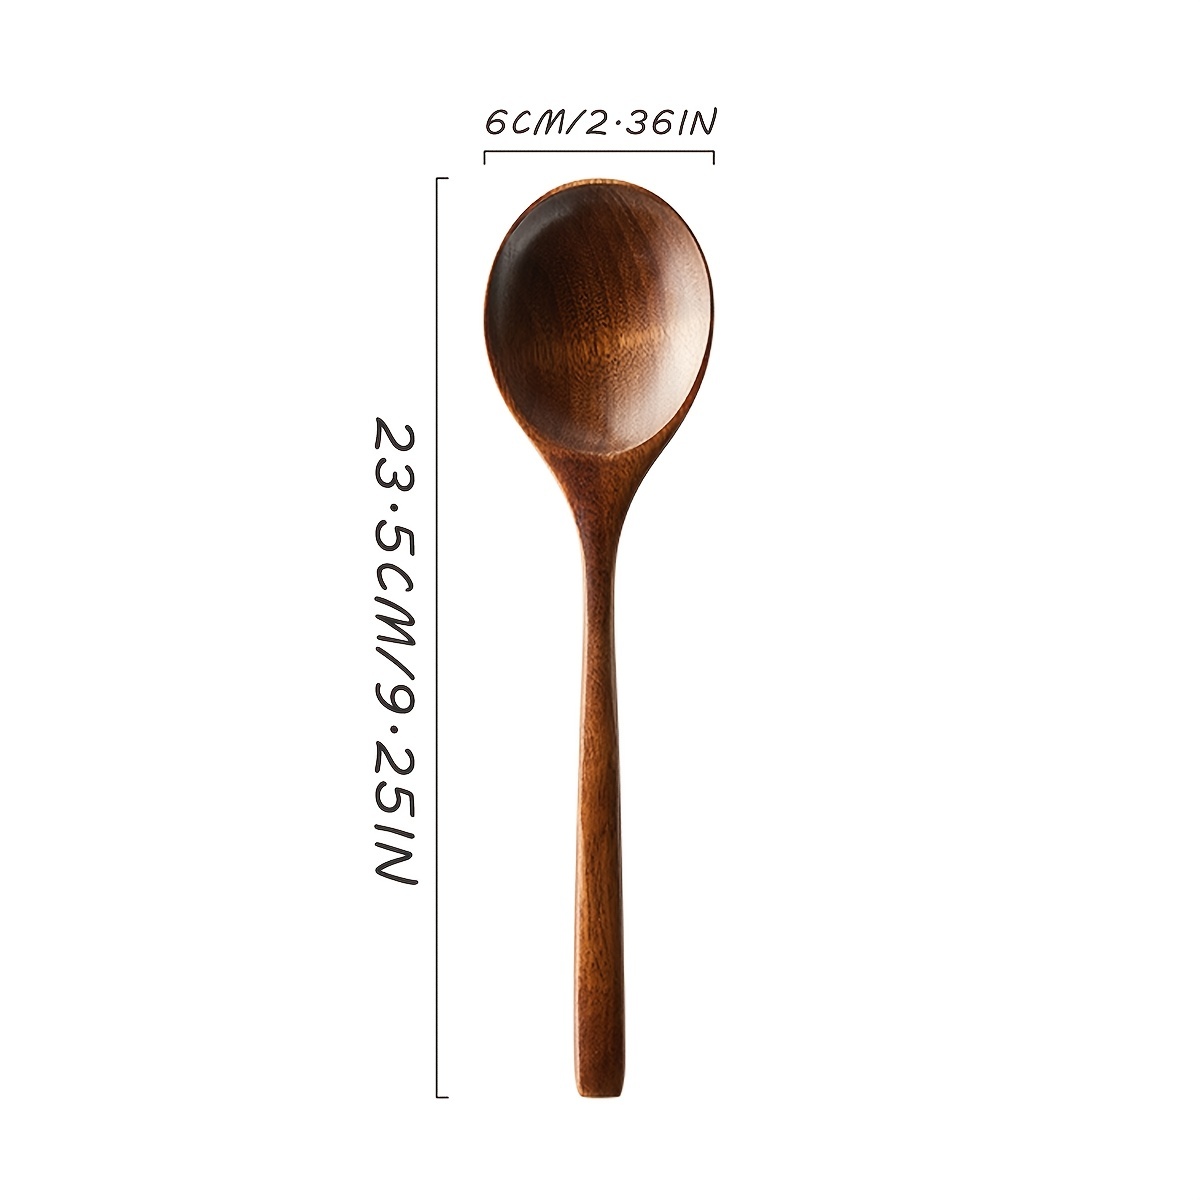 Wooden Large Long Handled Spoon Kitchen Cooking Big Rice Soup